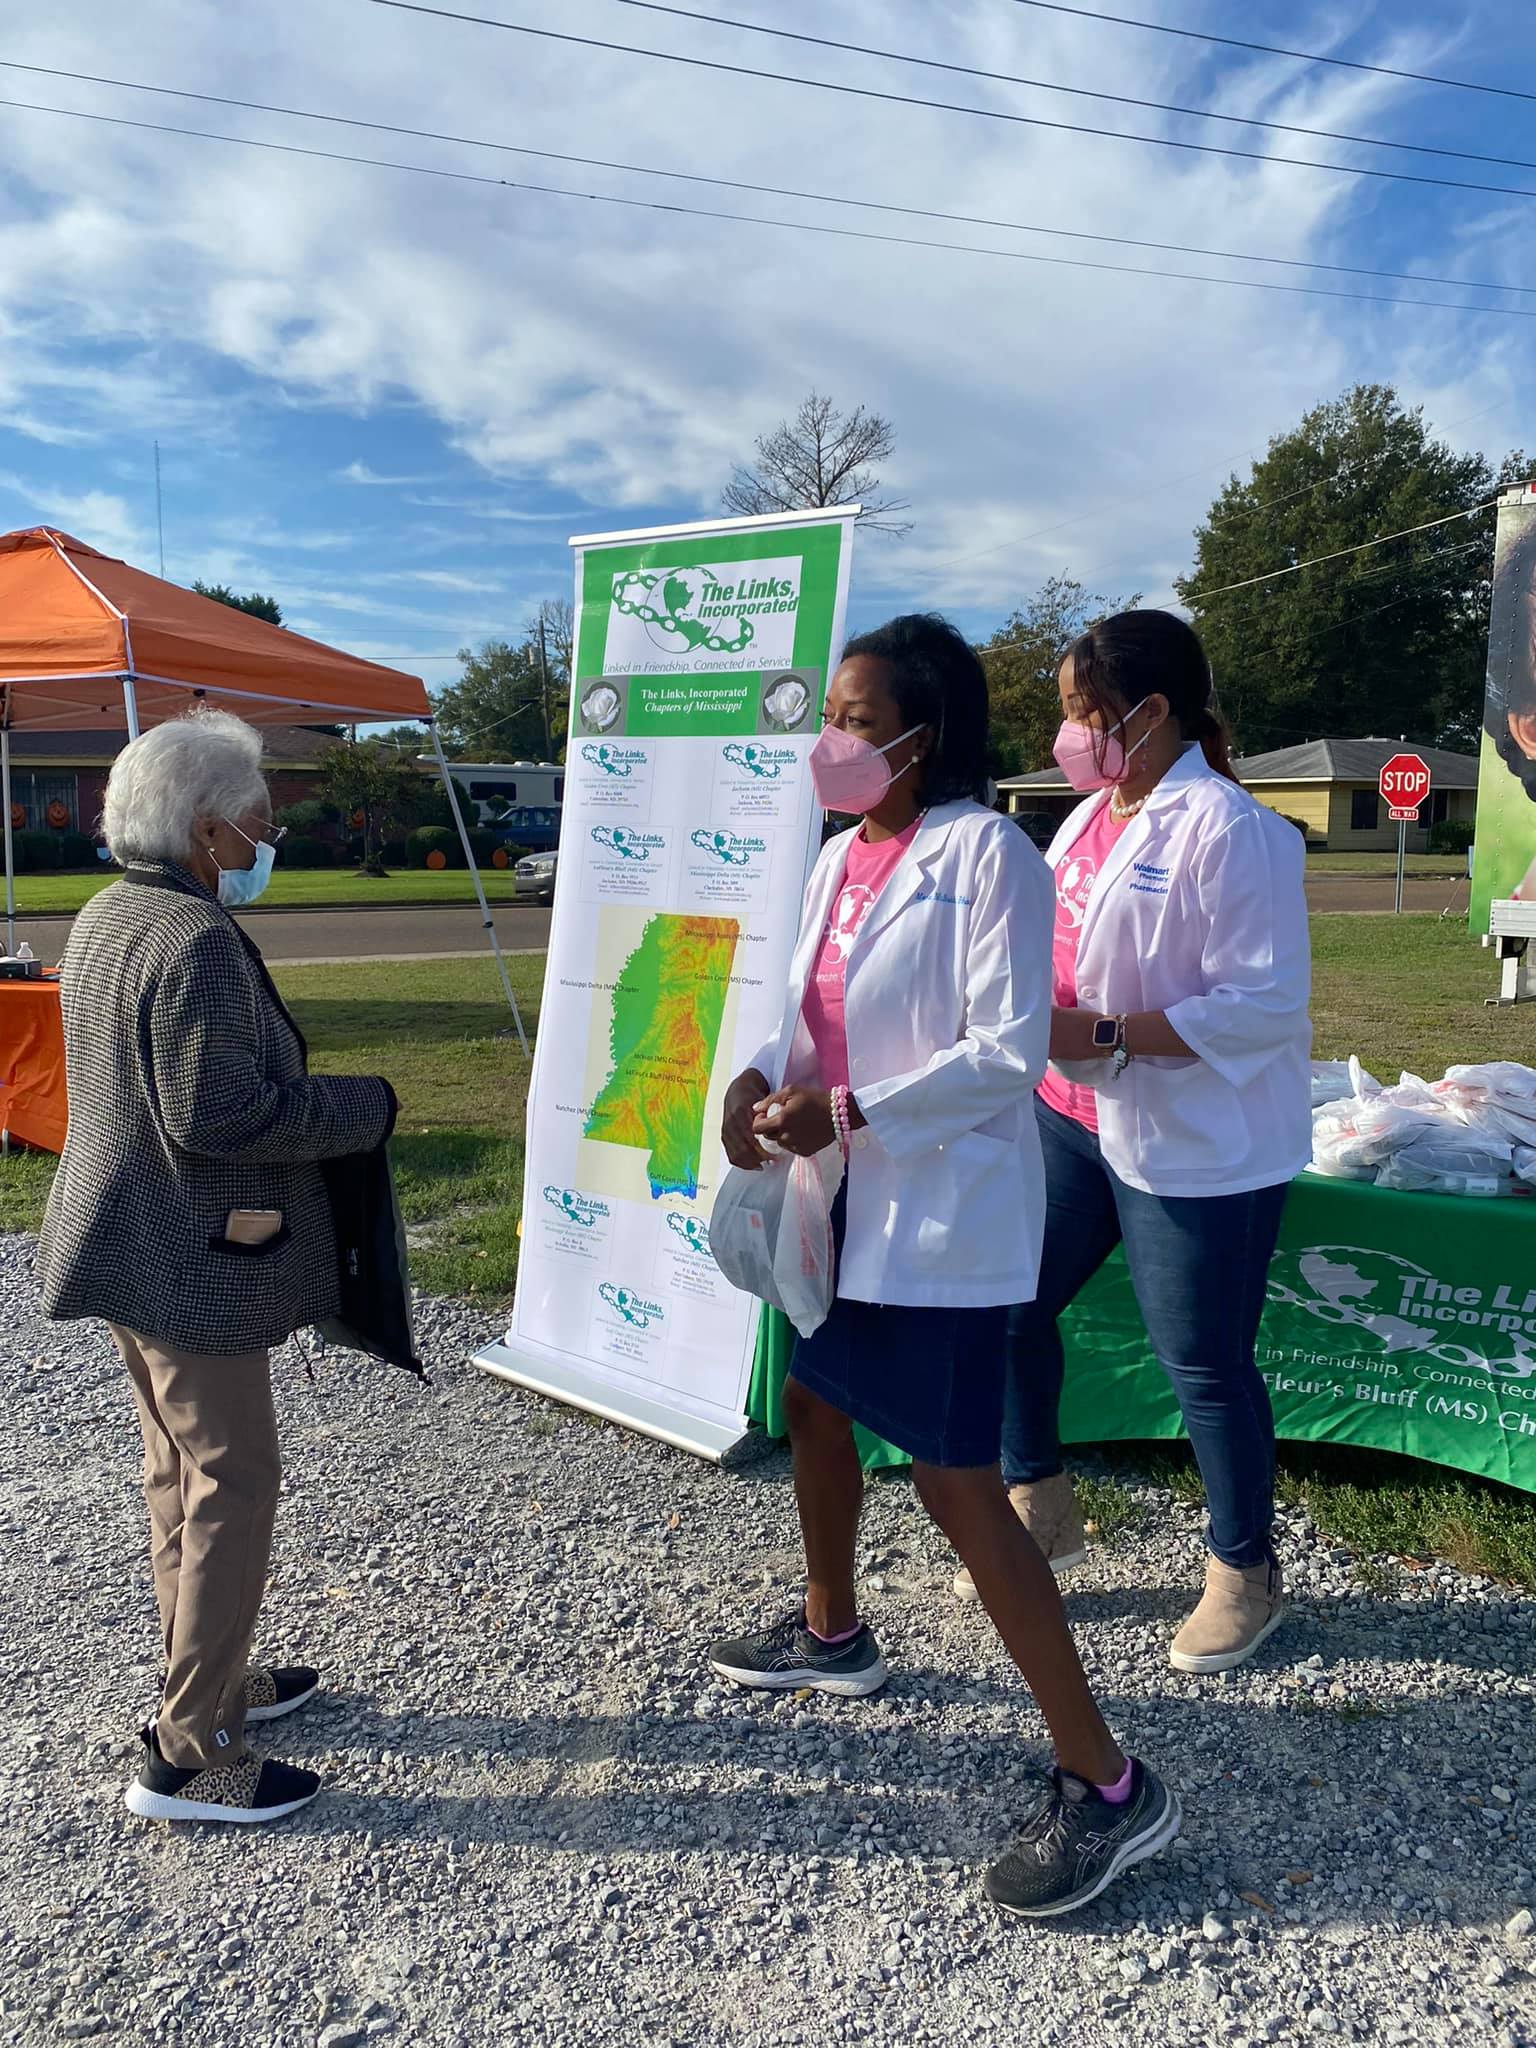 Two women in medical coats at an outdoor event